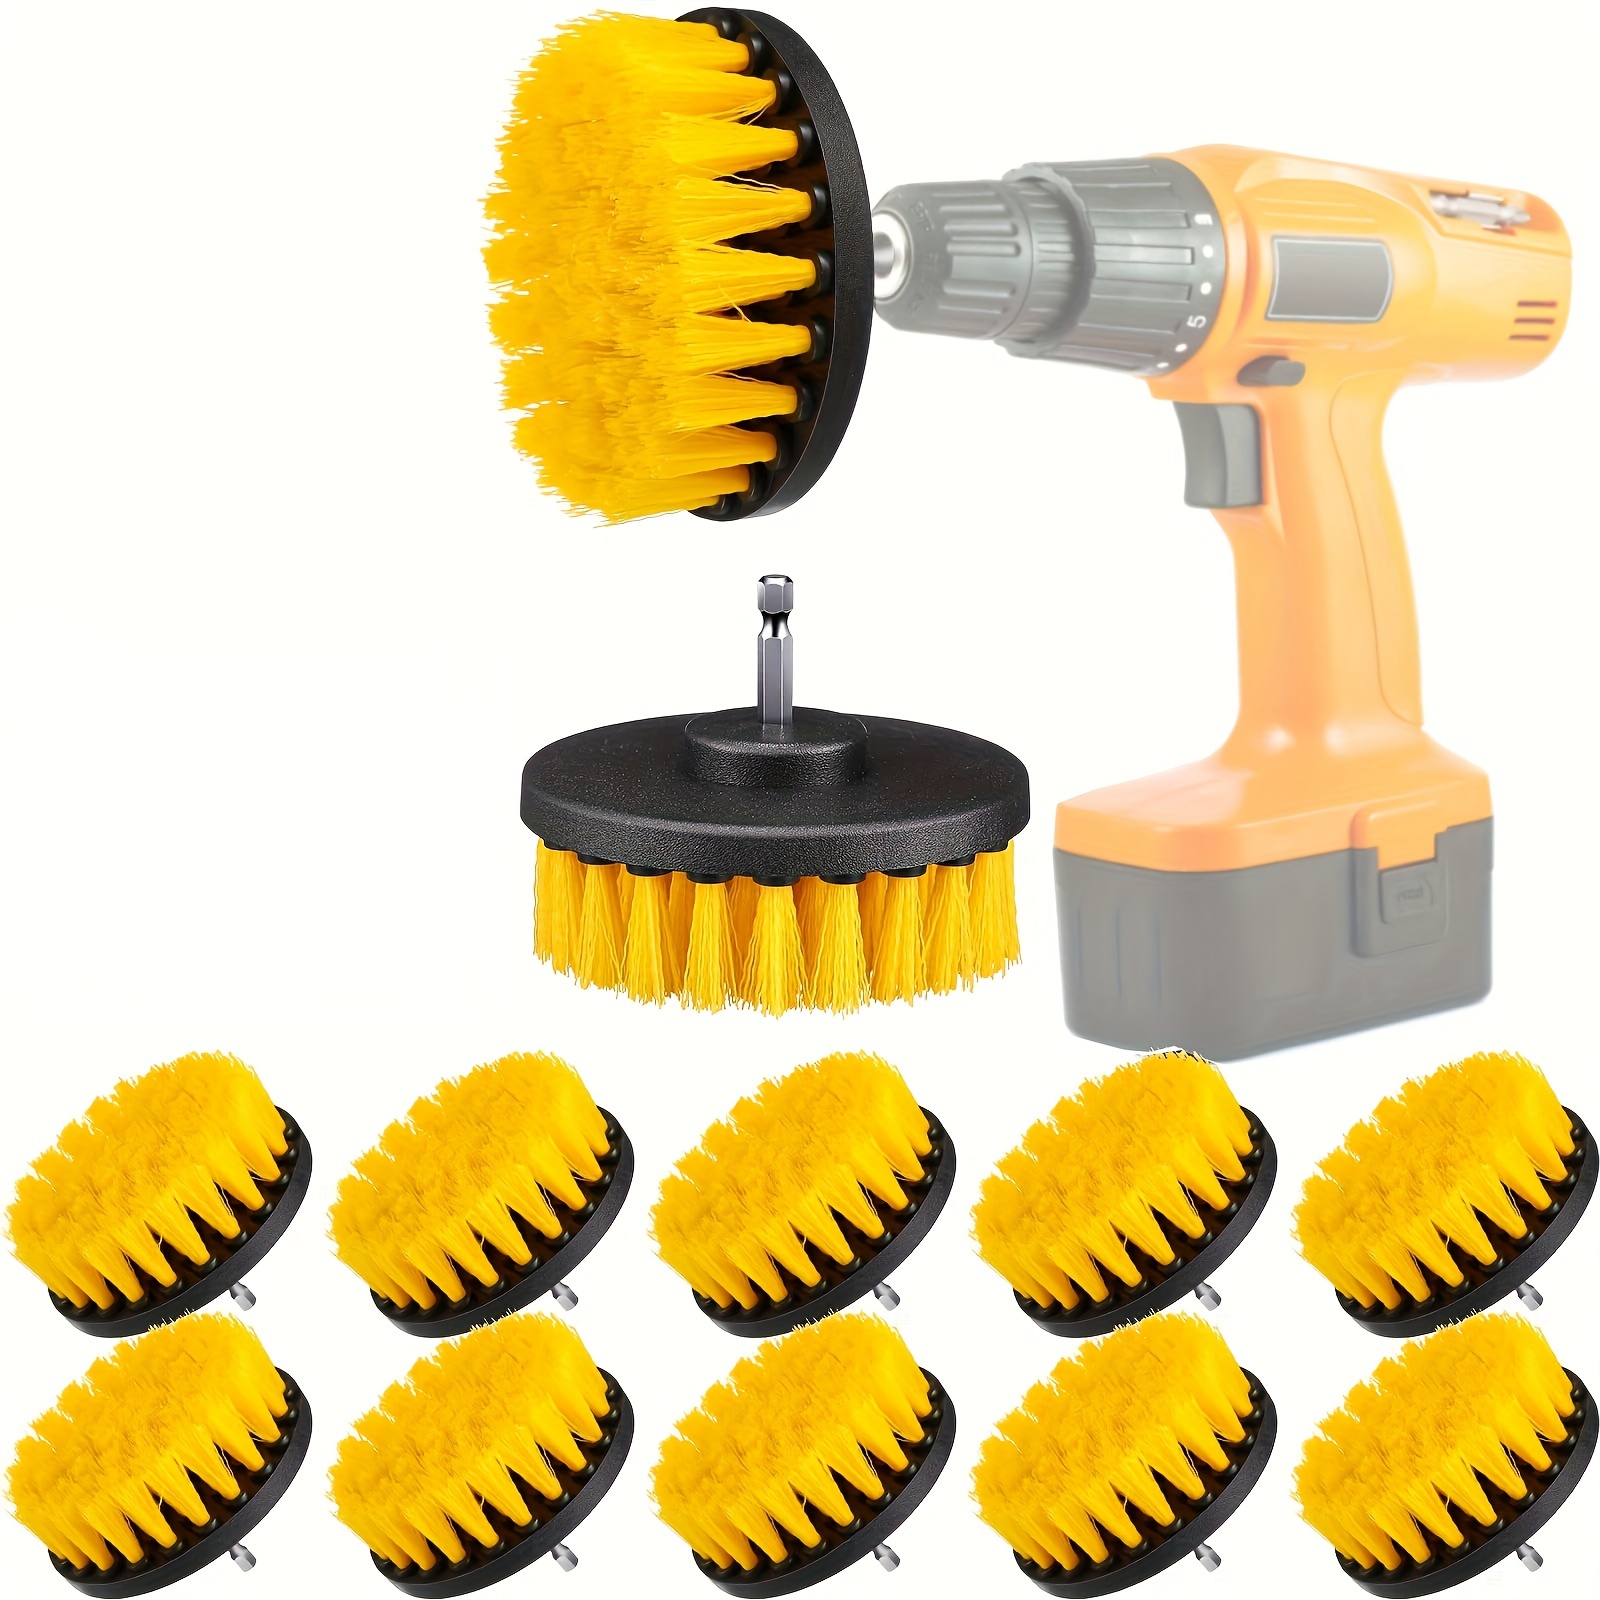 5pcs/set Small Drill Brush Kit, Electric Car Washer Cleaning Brush Tool  Set, General Purpose Cleaning Drill Brush, Made Of Pp Material, Can Be  Connected To Electric Drill For Use, Replaceable In Various